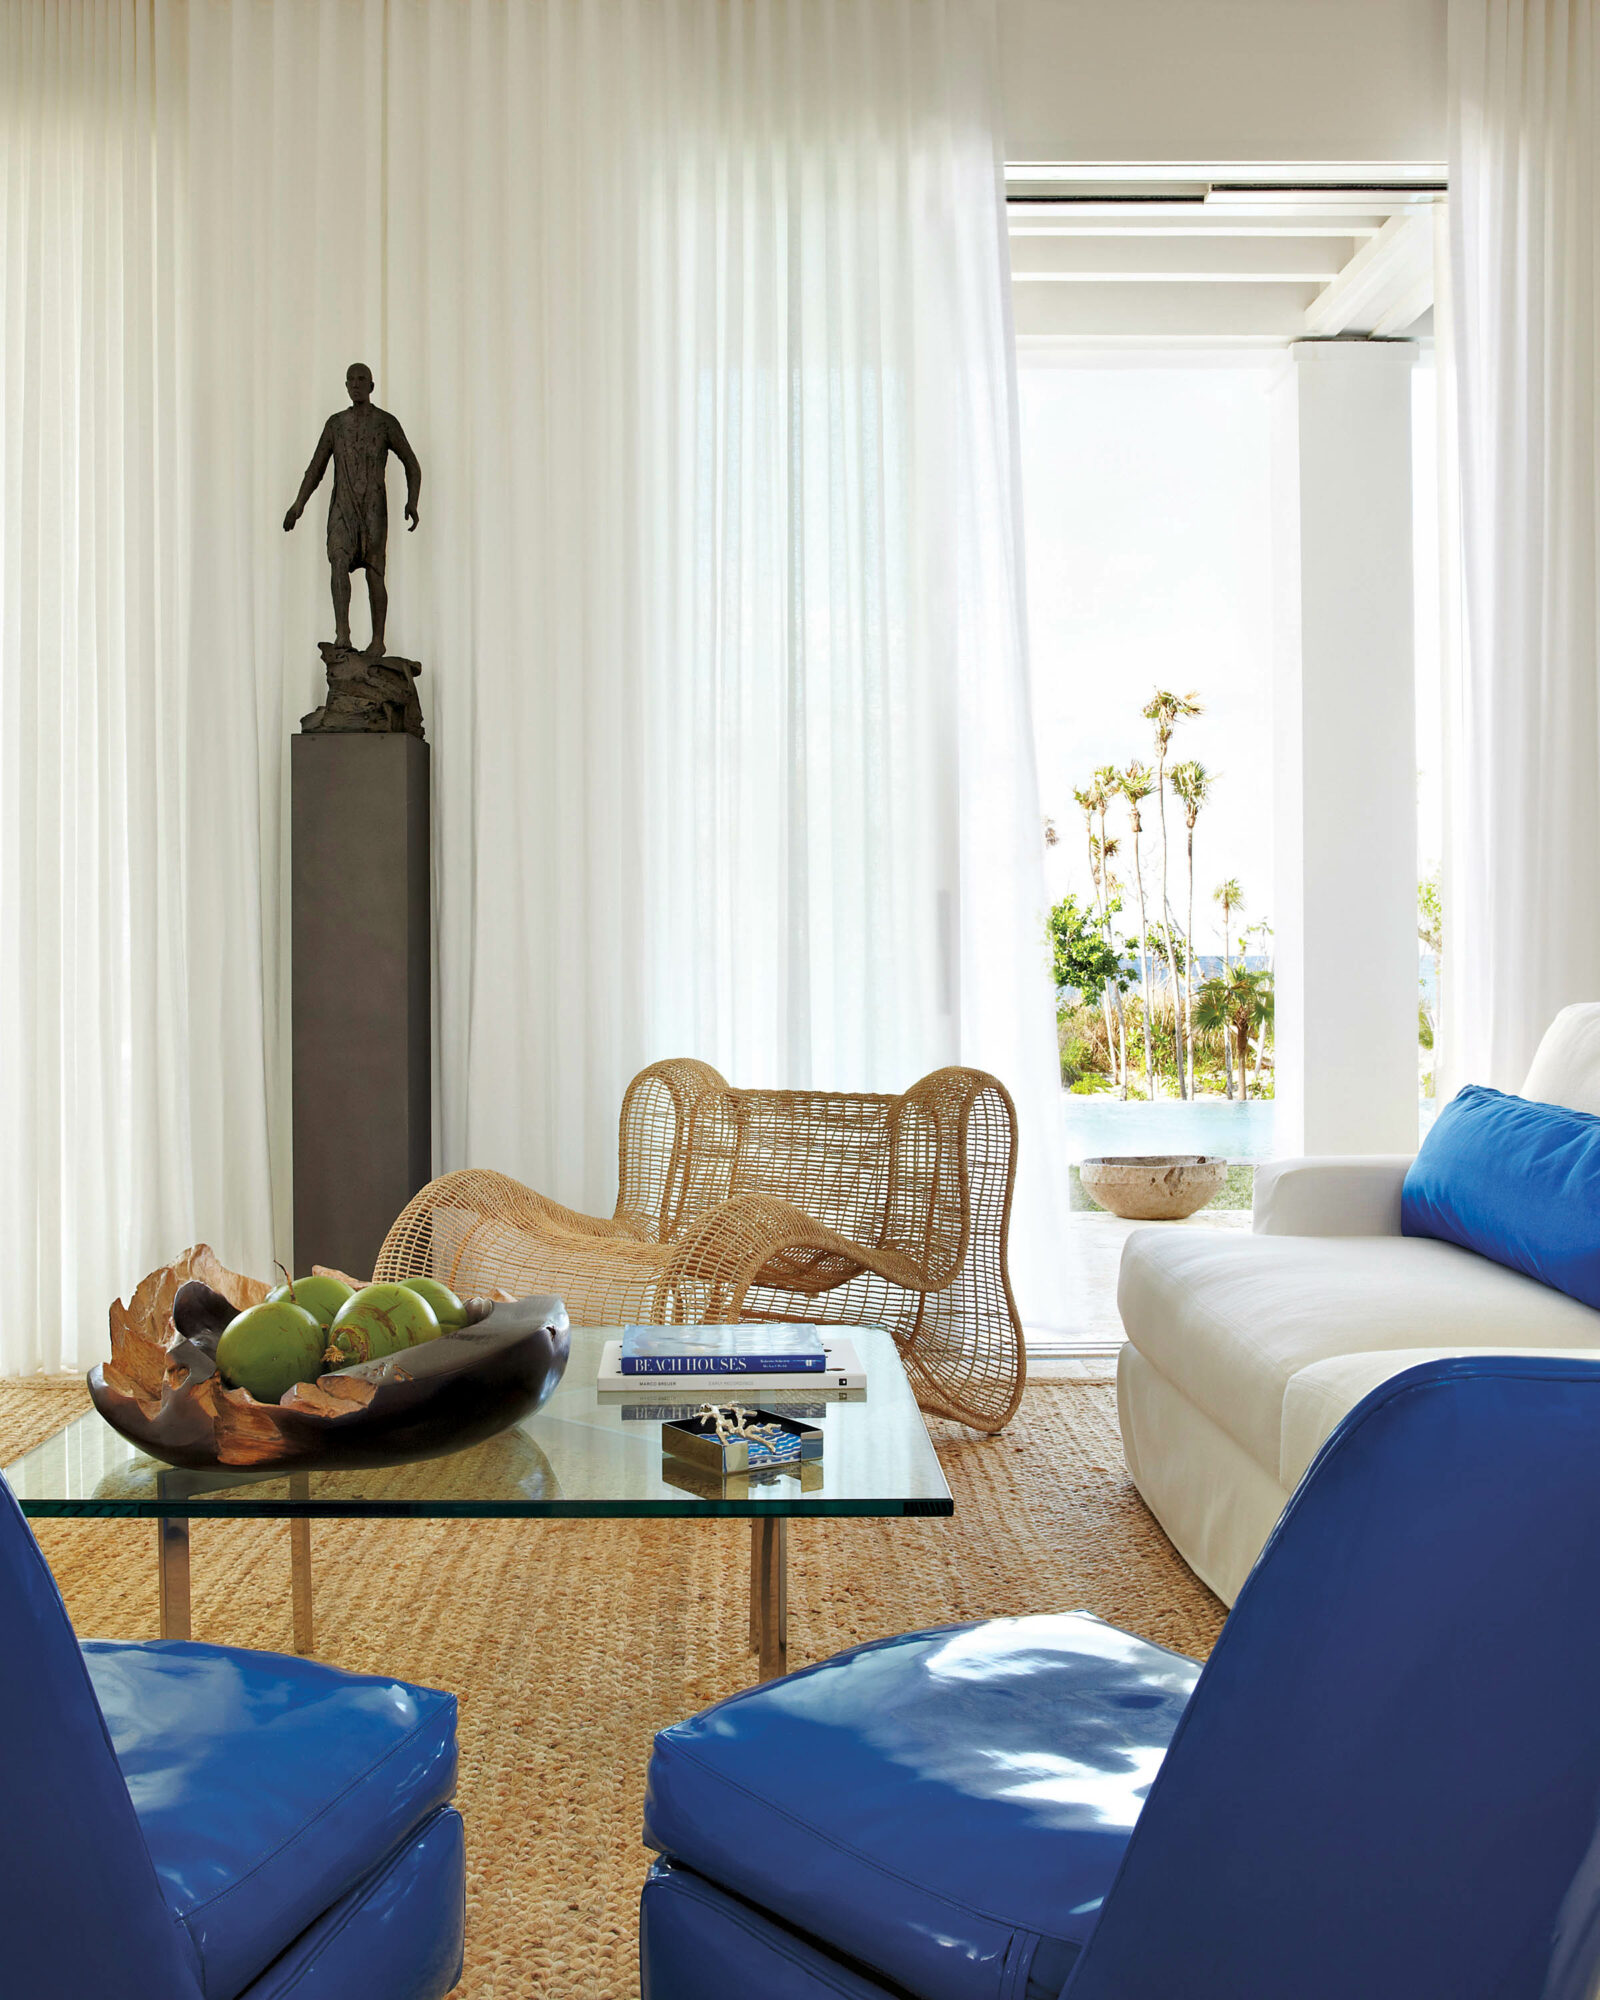 Room with blue armchairs, a lacquered coffee table, a curved rattan armchair and a statue of a man